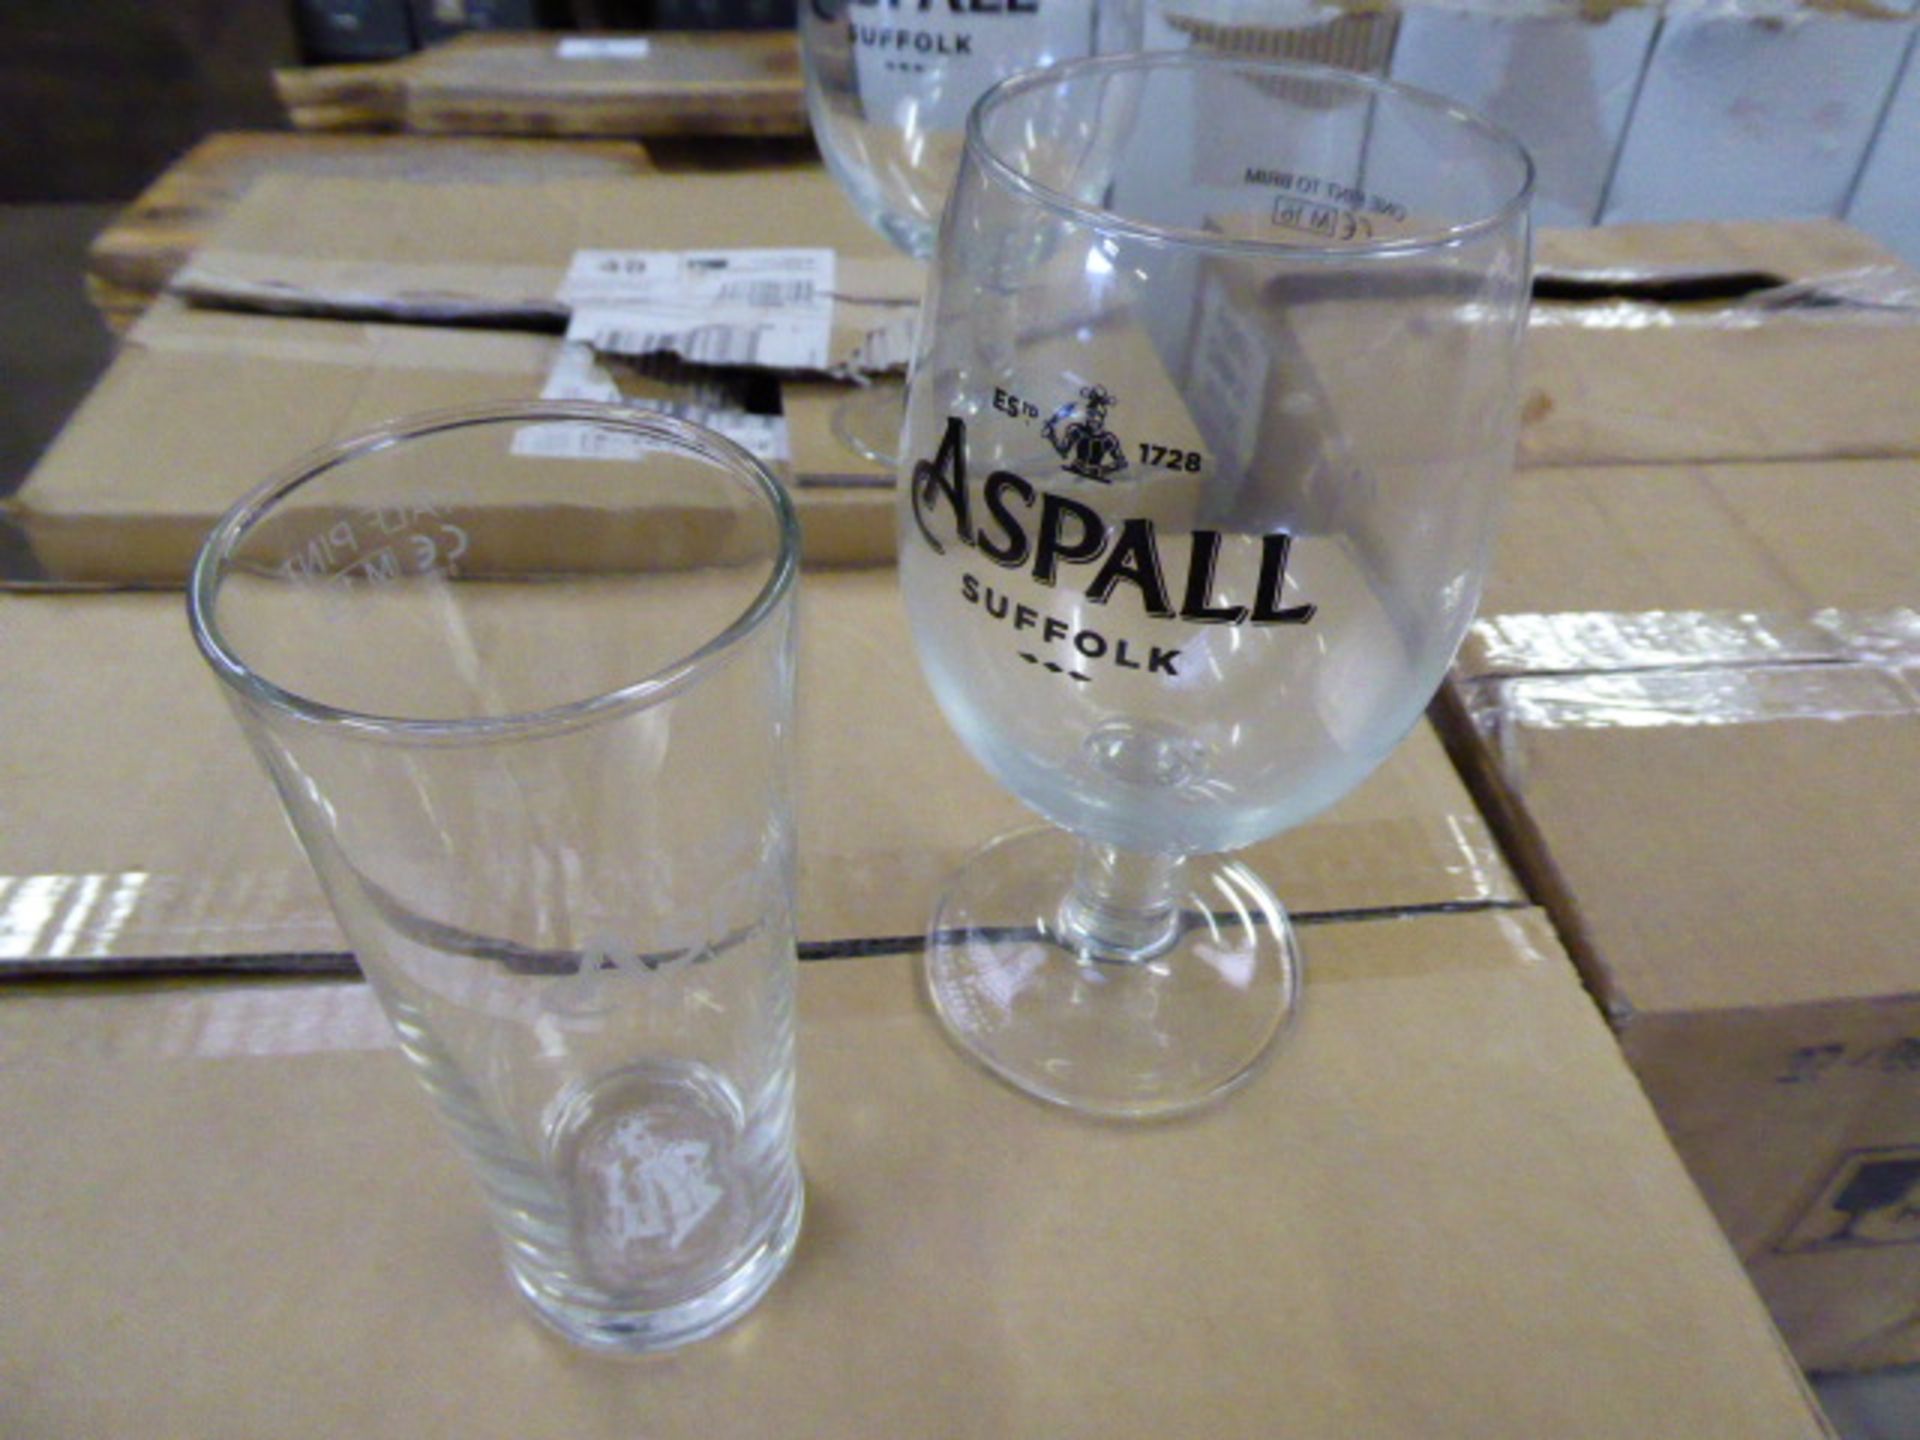 5 boxes containing branded drinking glasses, mainly Aspall